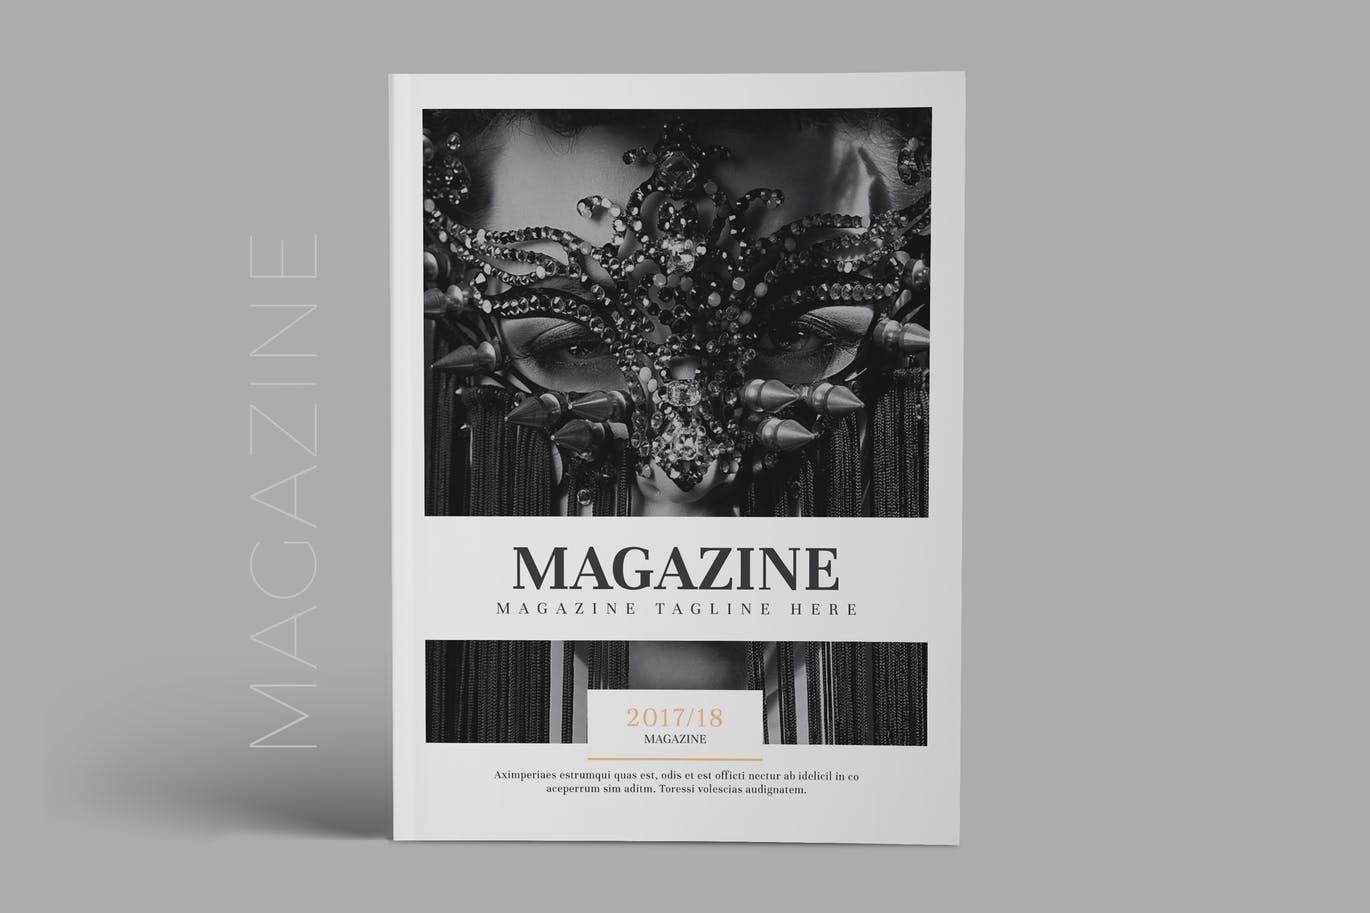 A stylish magazine template for printing